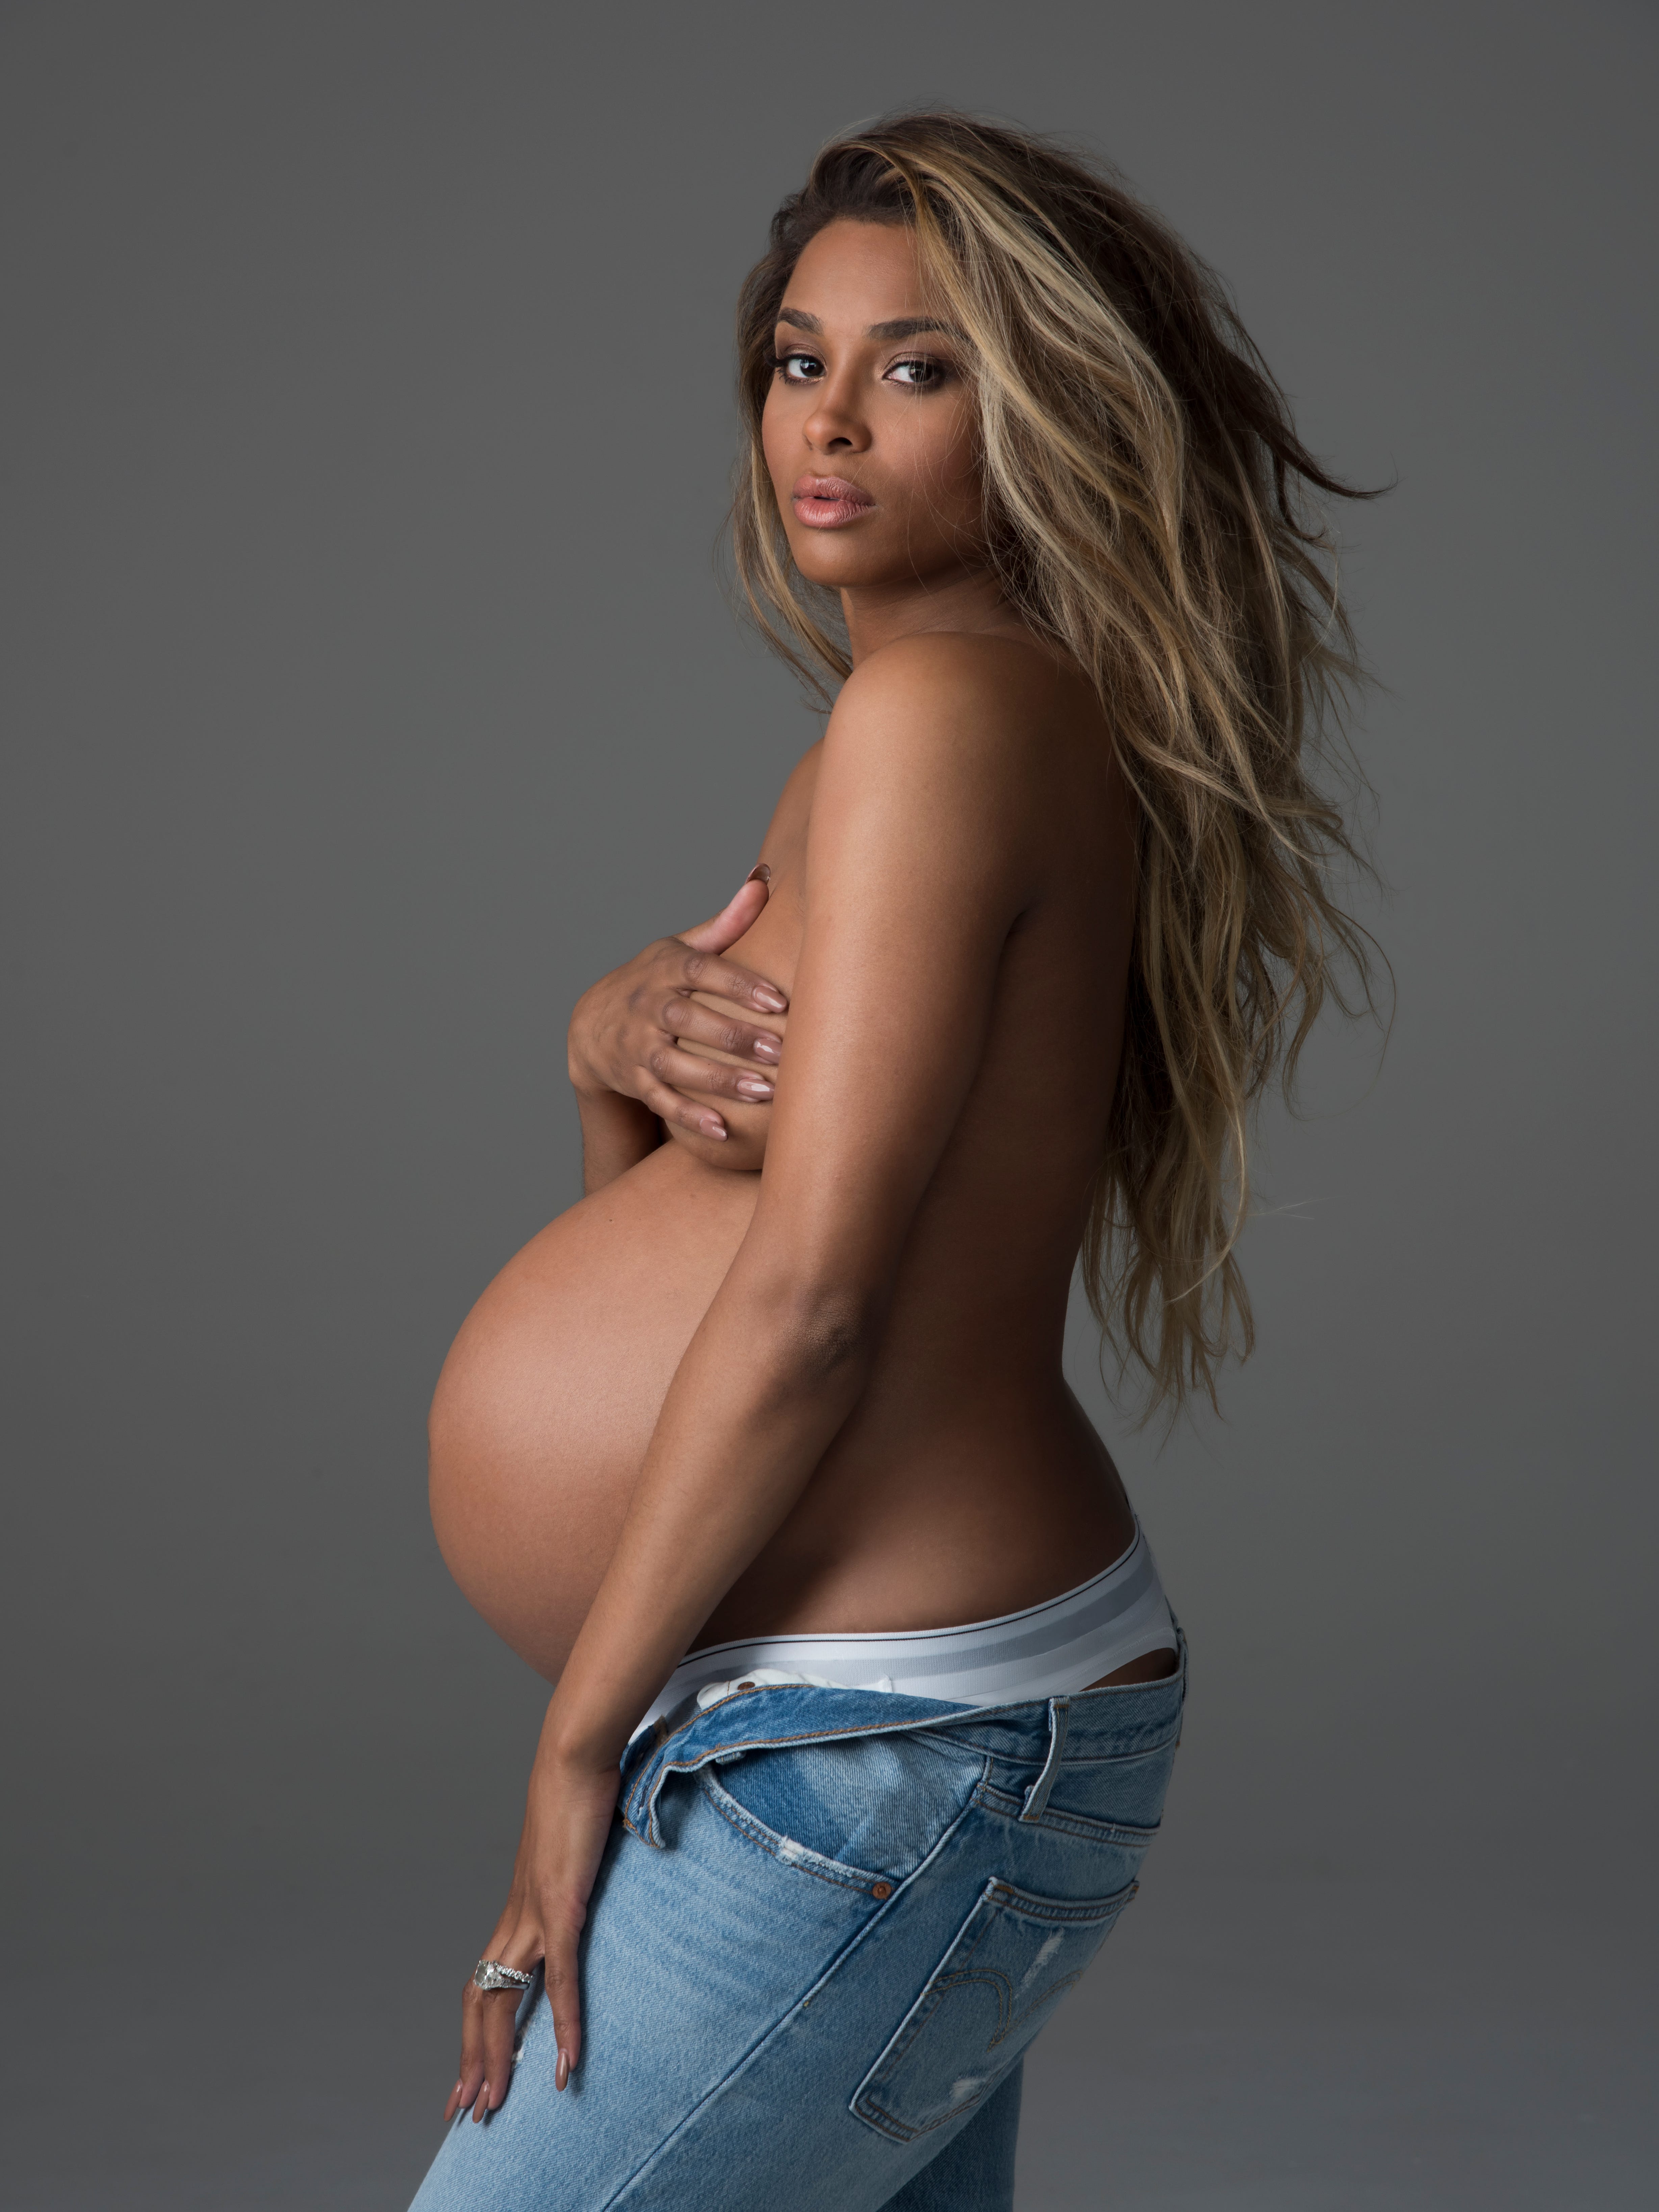 Pregnant Beautiful Naked - Sexist trolls are furious about Ciara's nude pregnancy shoot